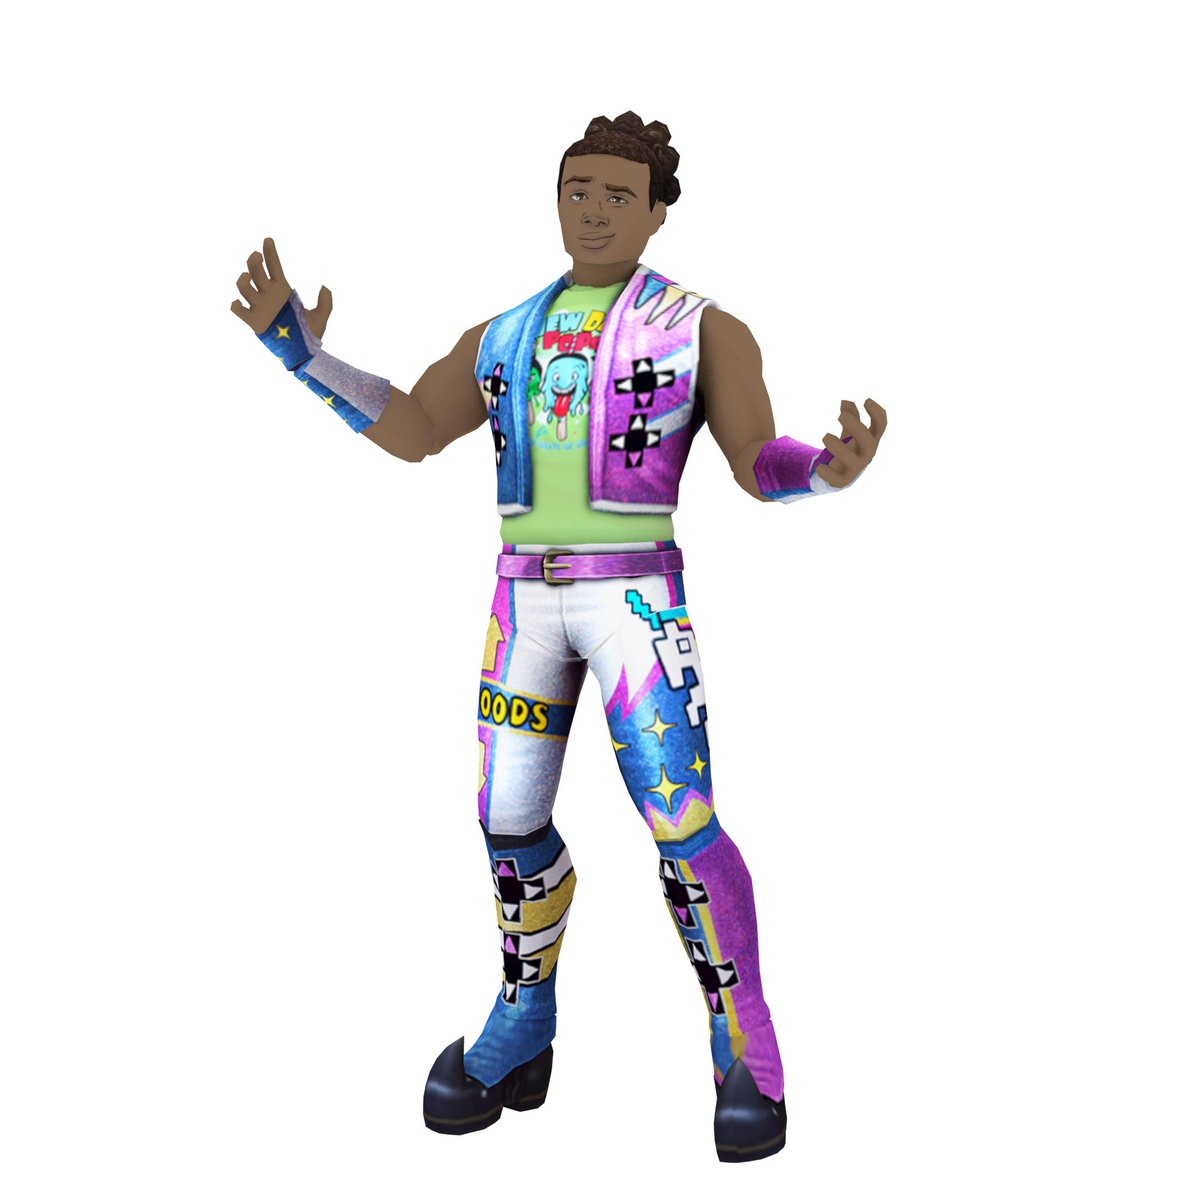 Wwe On Twitter You Ve Seen Him Dominate In The Ring And On His Gaming Channel Upupdwndwn But Now You Can Become Him Download Xavierwoodsphd S Avatar On Roblox For Free At Https T Co Zvyjiw1jja Https T Co Liaxa4l5q8 - wwe roblox avatar